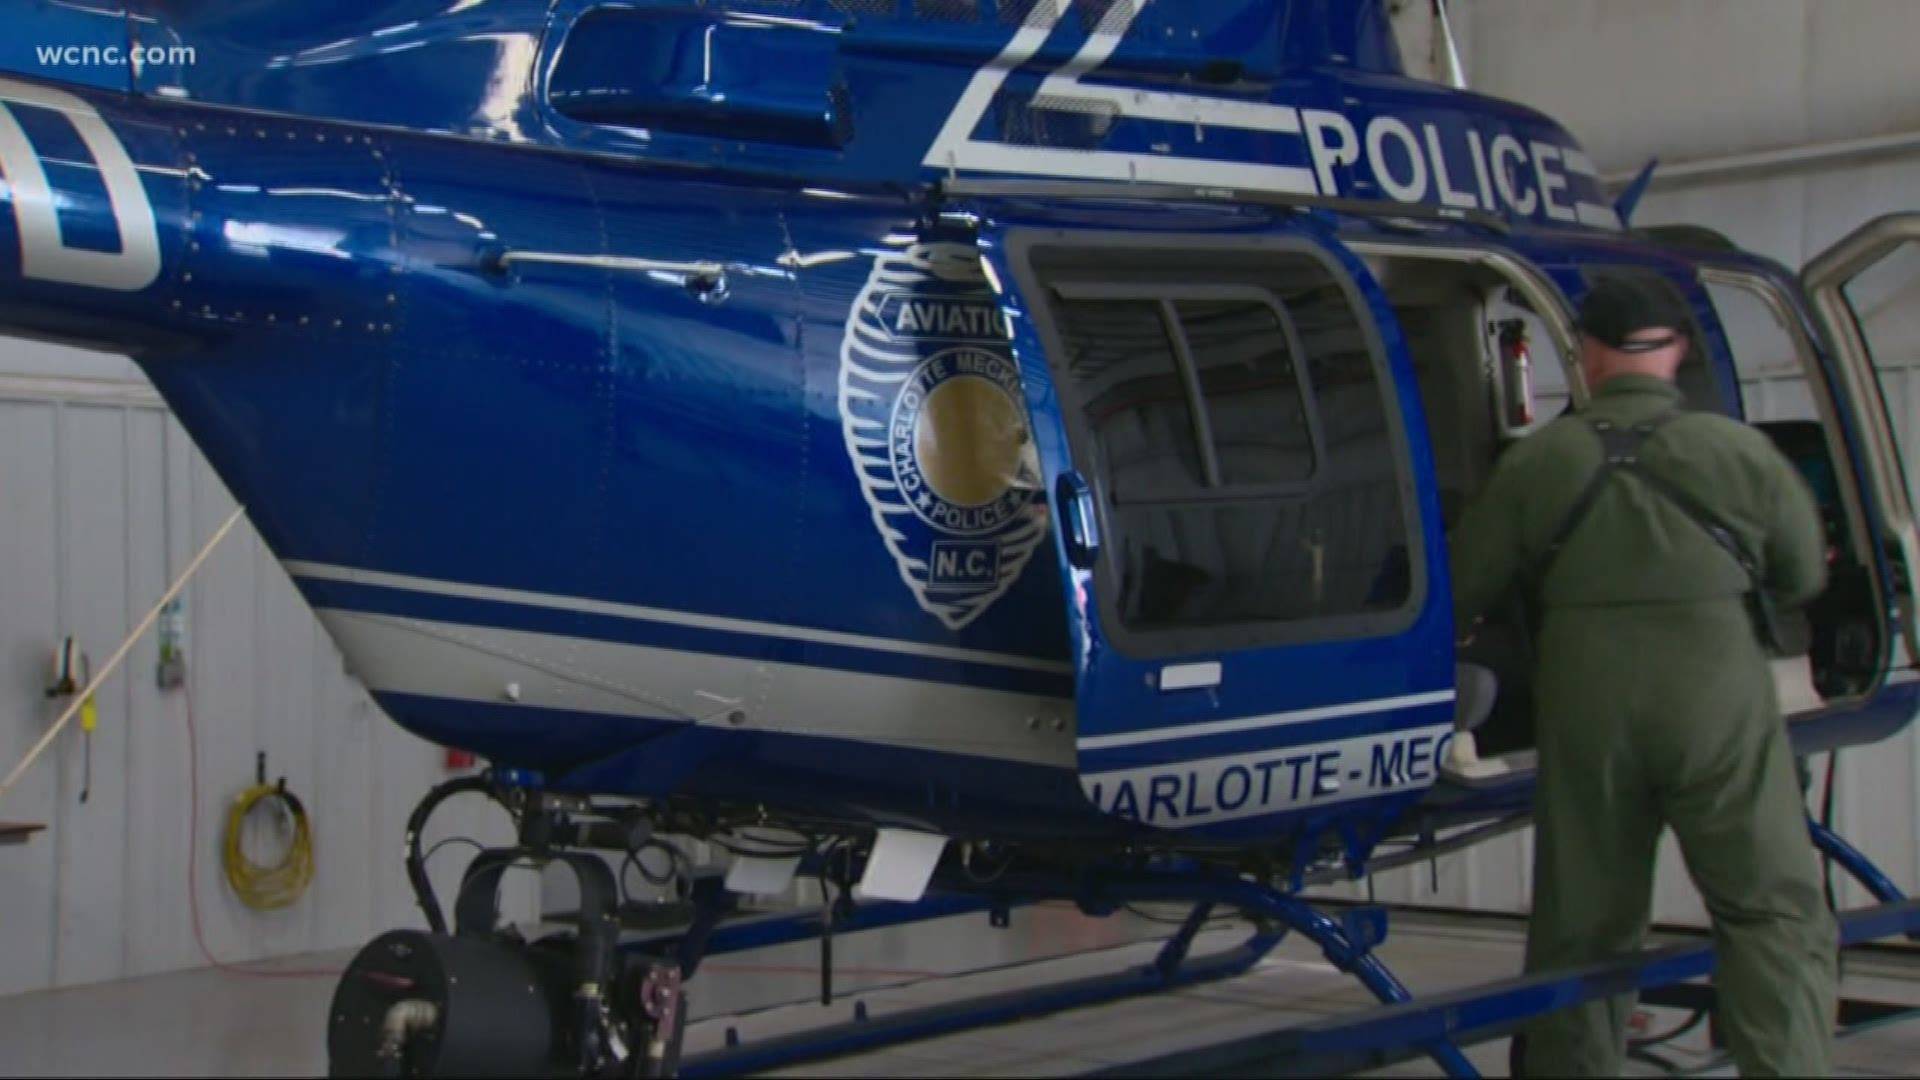 CMPD's helicopter is going high-tech. The chopper, nicknamed Snoopy, has new upgrades including an HD infrared camera to track suspects in the dark.
Snoopy's cameras can also zoom in on a license plate, allowing officers to read it from as far as 1,500 feet away.